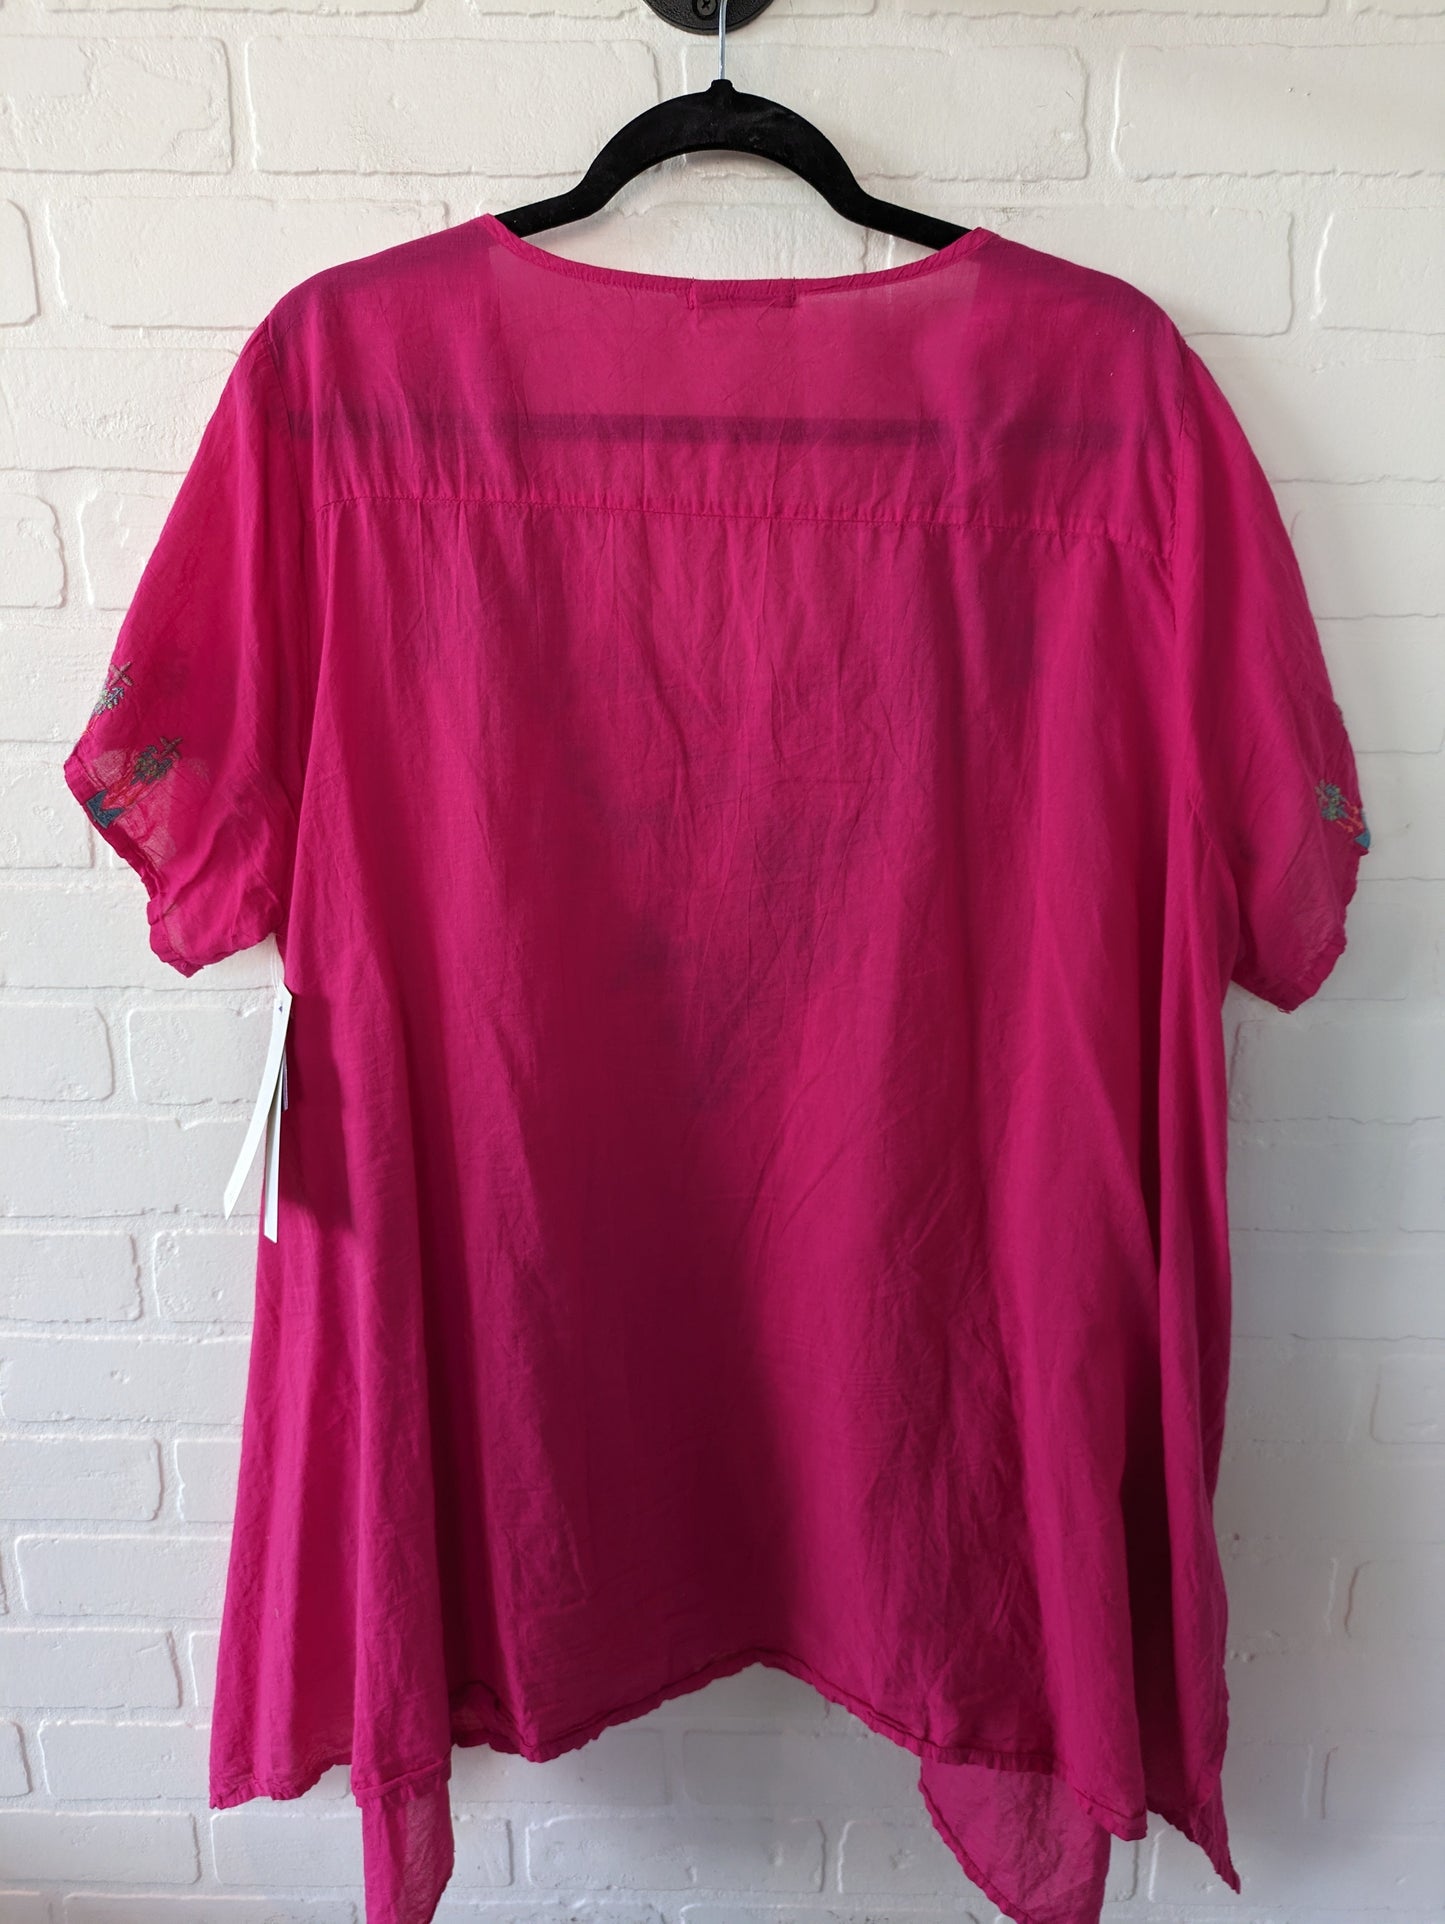 Top Short Sleeve Designer By Johnny Was  Size: 1x